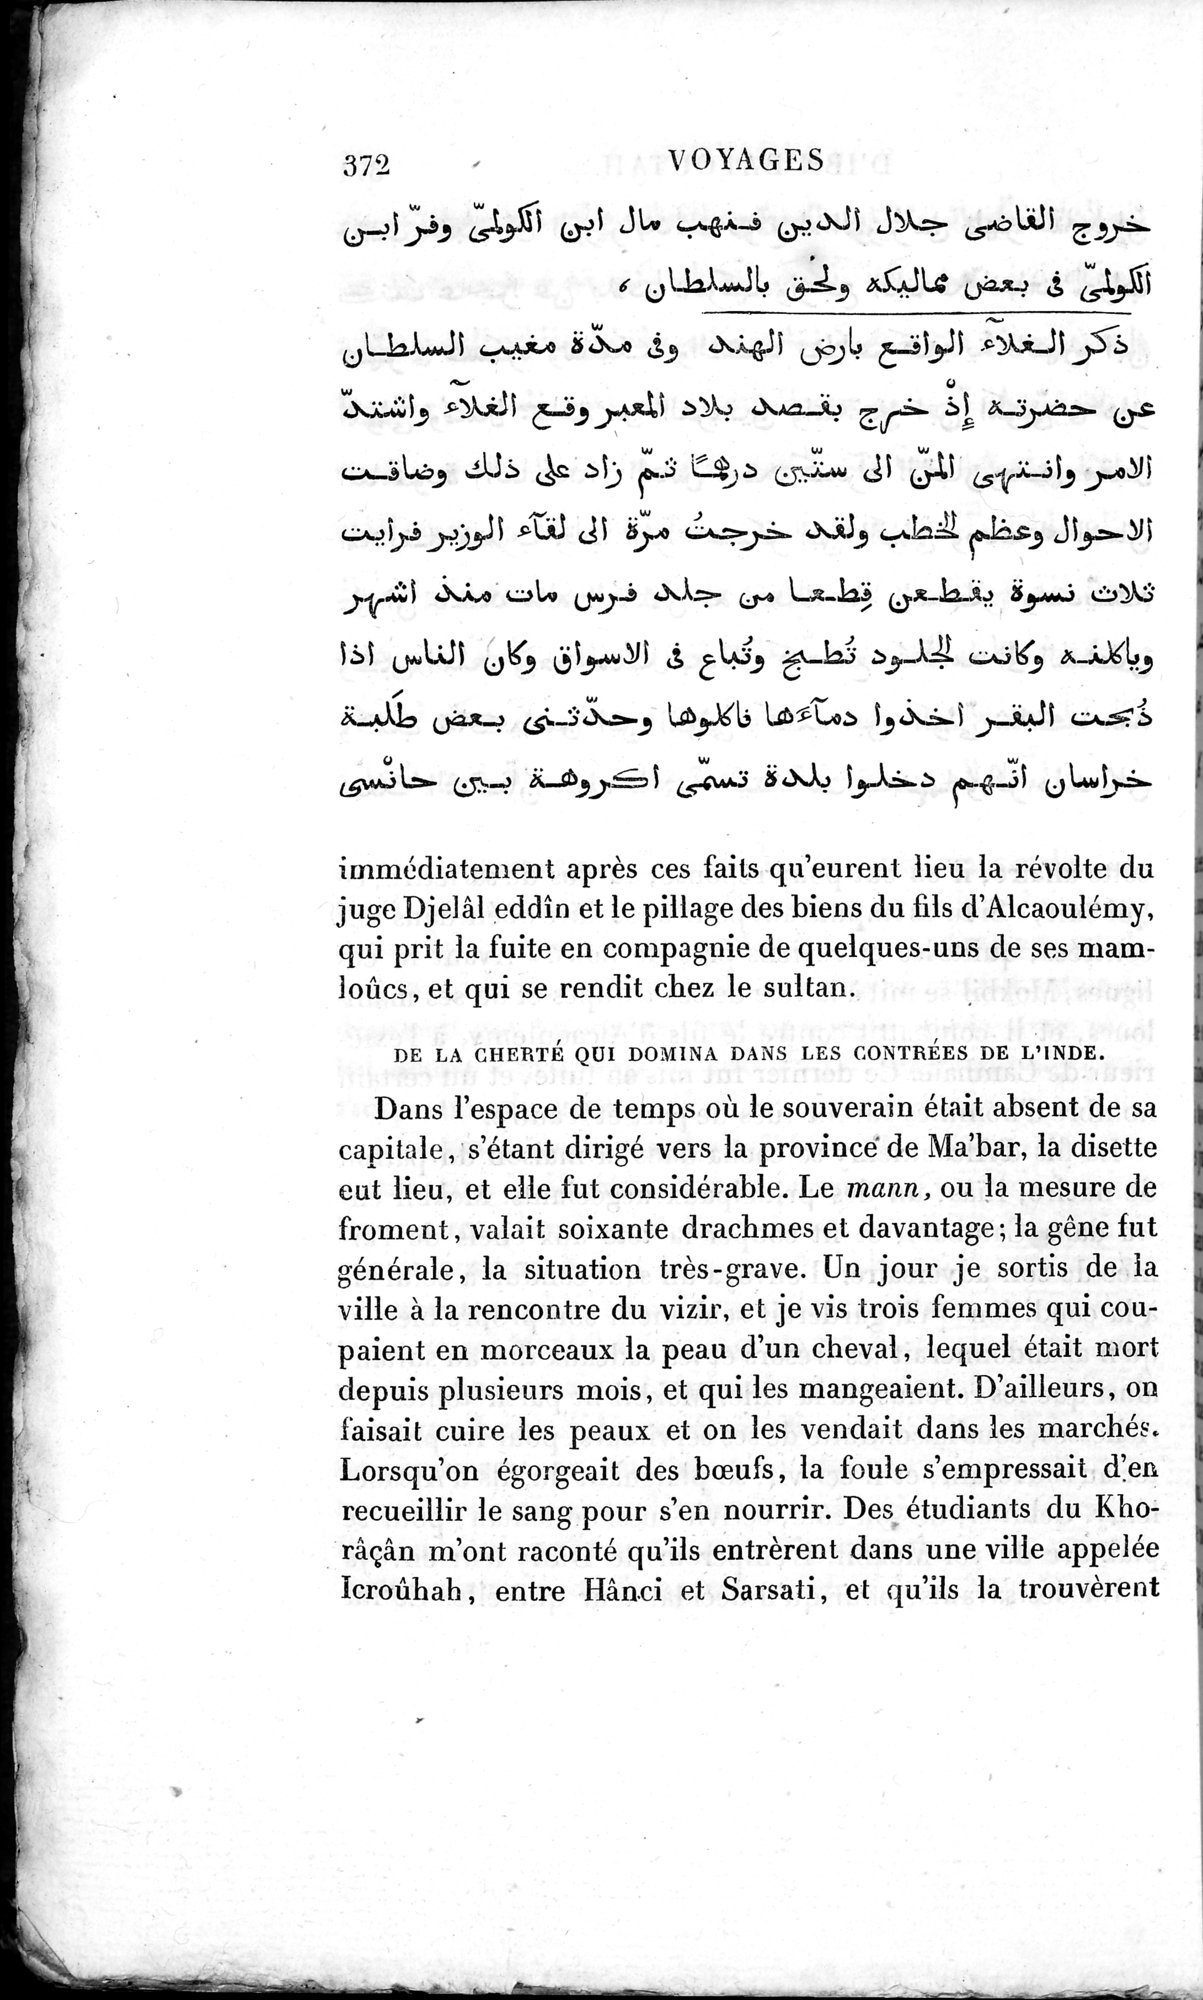 Voyages d'Ibn Batoutah : vol.3 / Page 412 (Grayscale High Resolution Image)